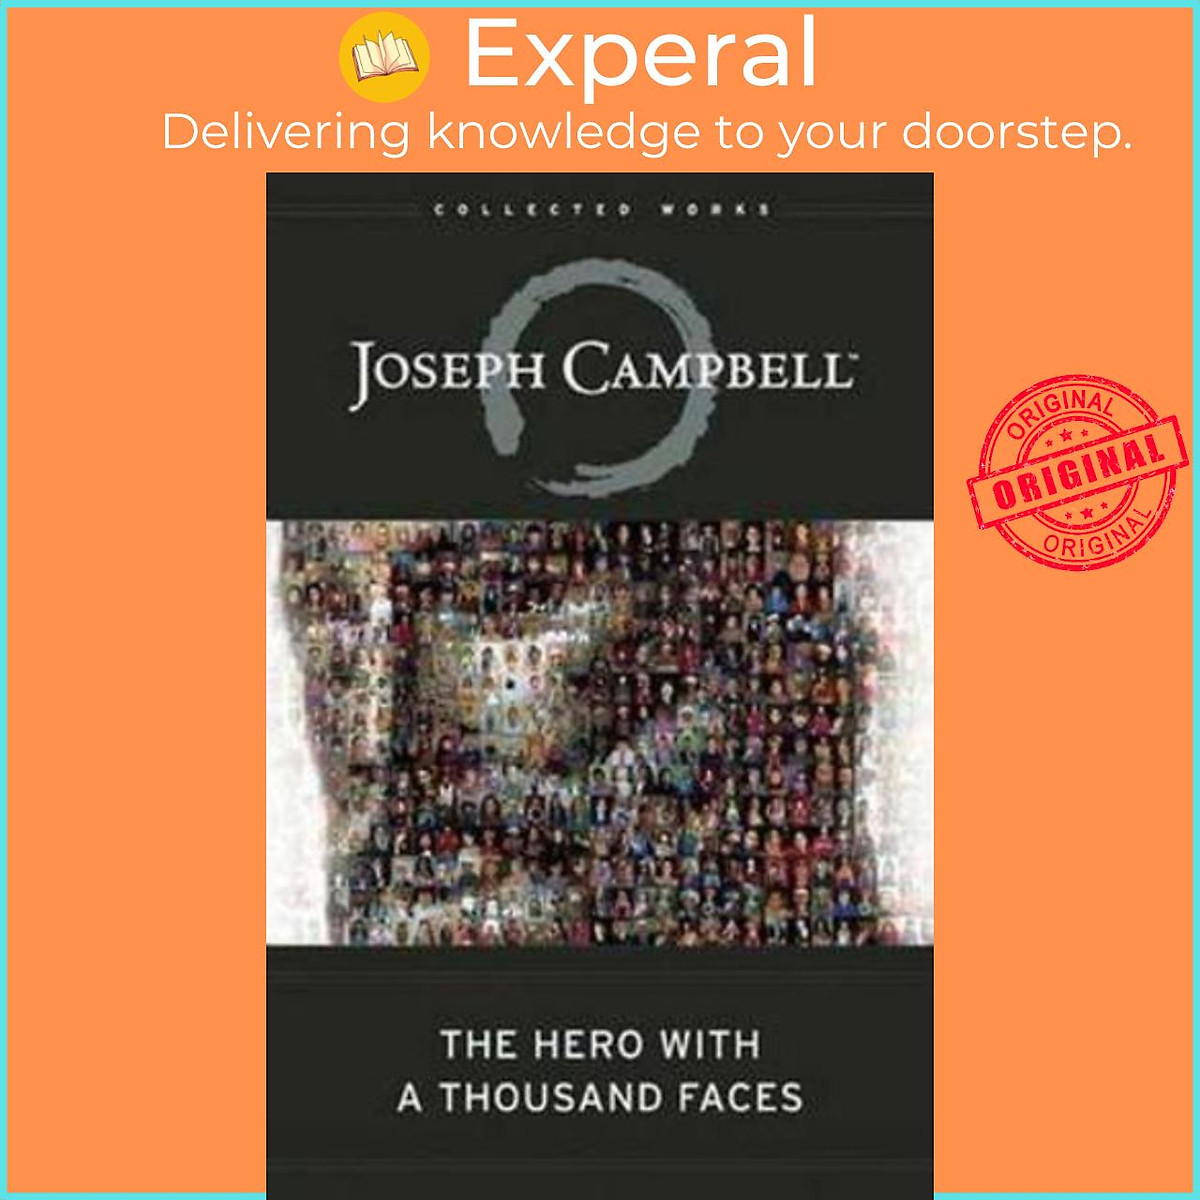 Sách - The Hero with a Thousand Faces by Joseph Campbell (US edition, hardcover)